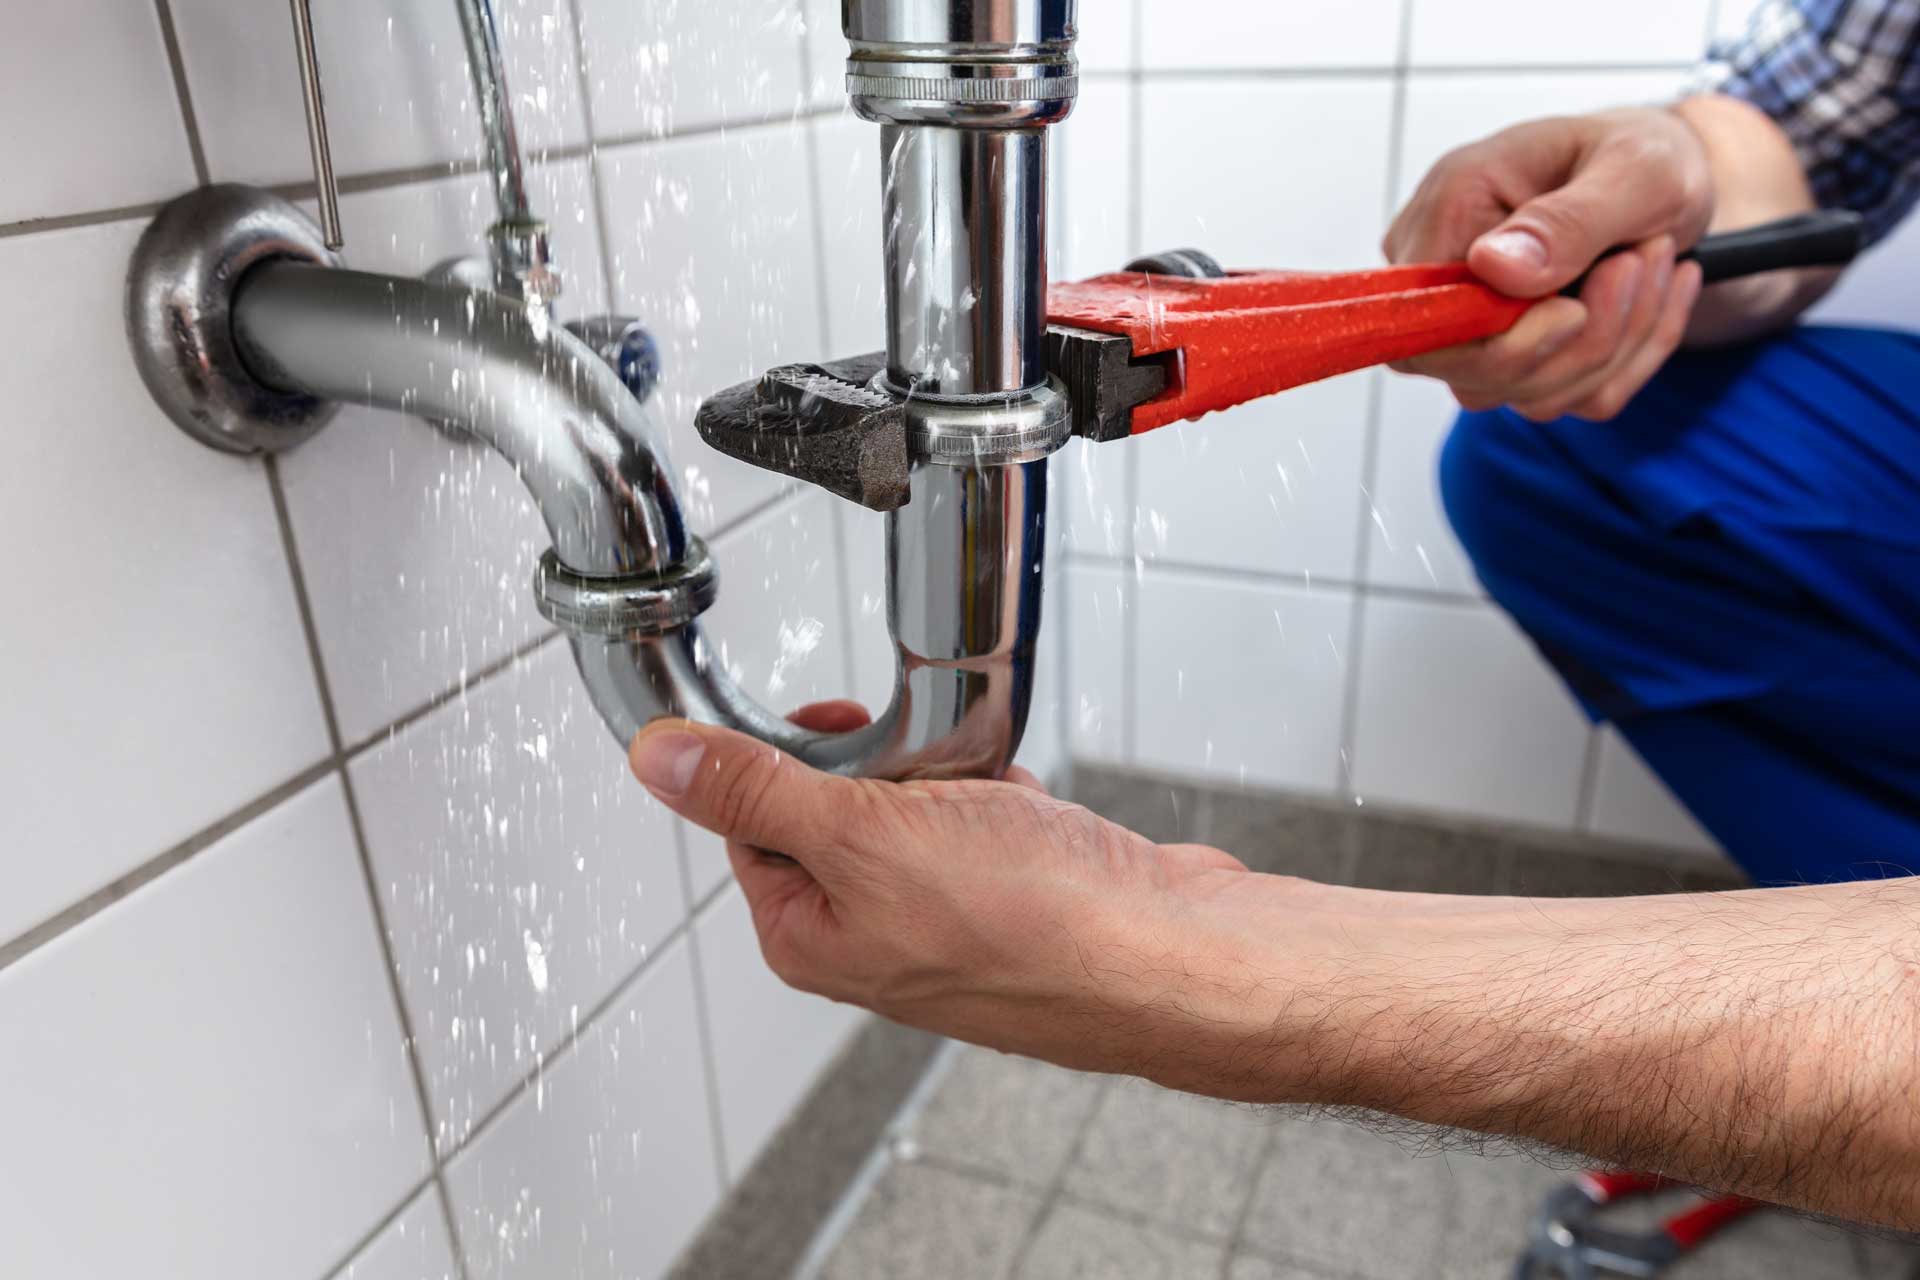 Plumbing Leaks That Can Attract Pests